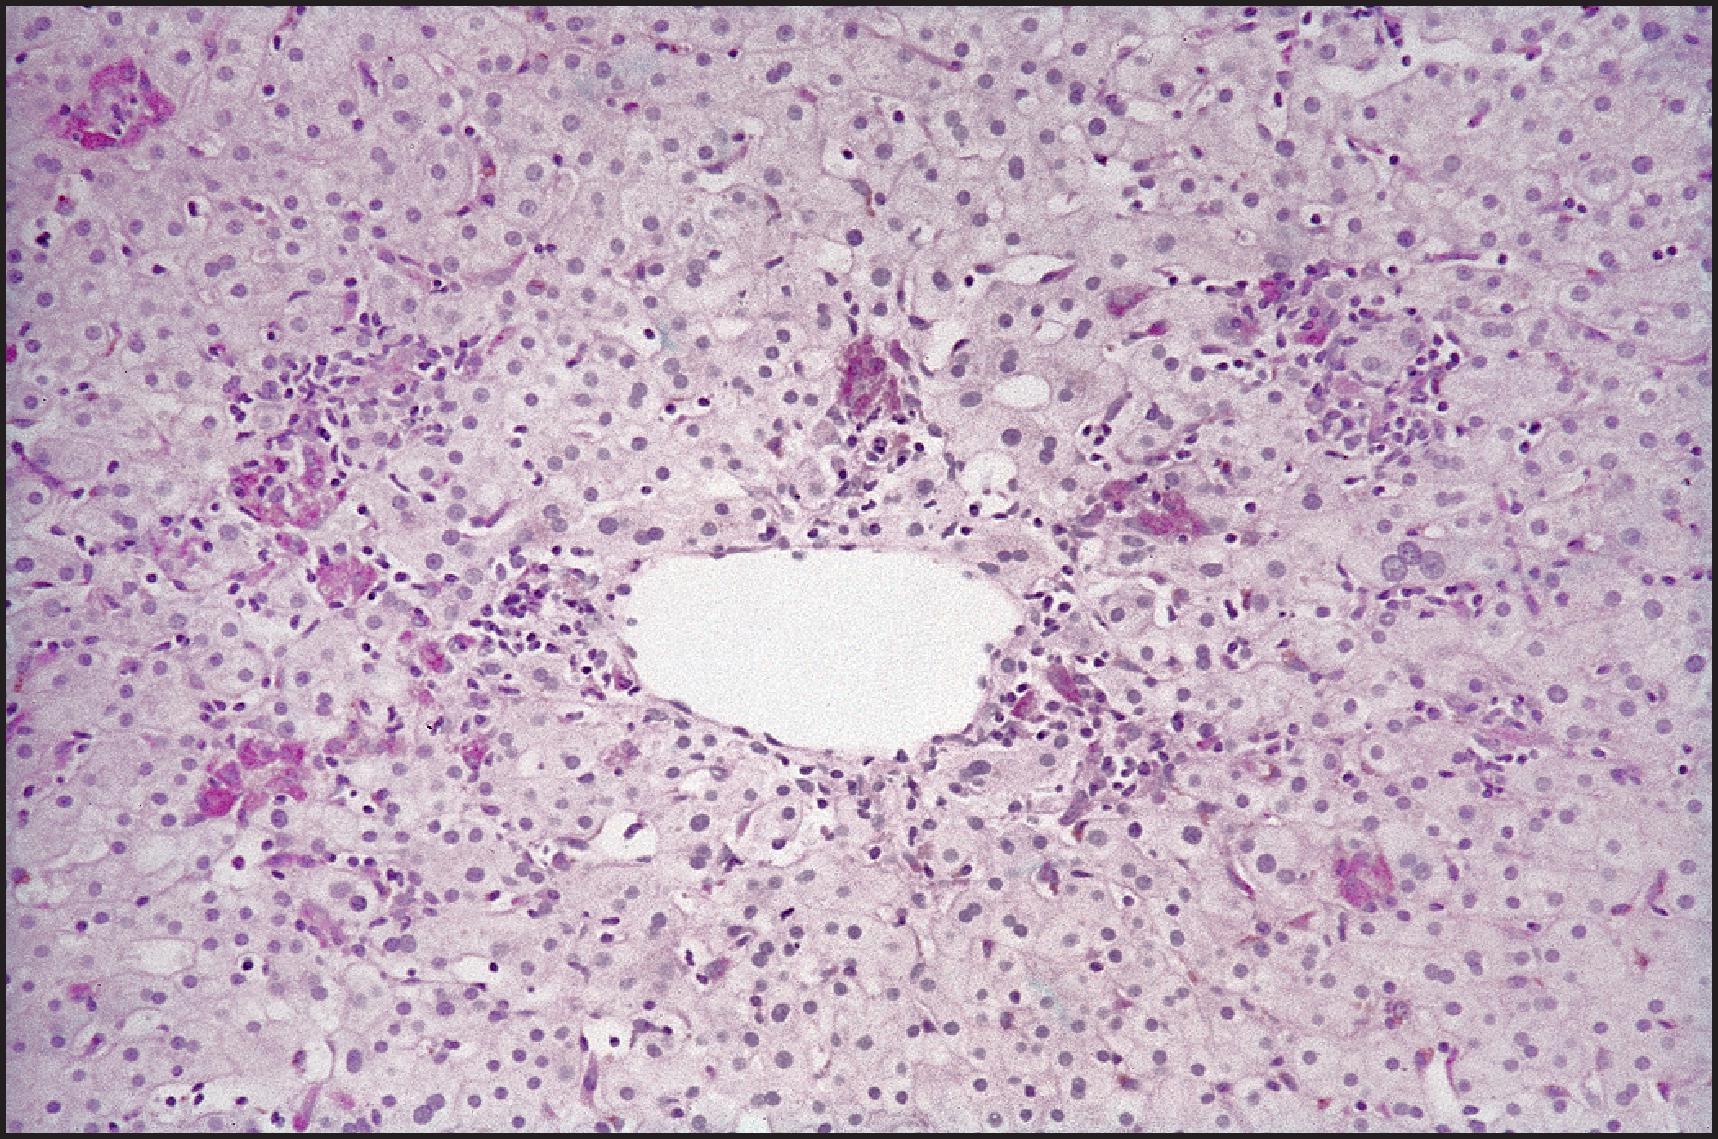 Figure 6.5, Classic acute hepatitis. Clumps of hypertrophied Kupffer cells are most prominently seen near the centrizonal region and stain strongly with periodic acid-Schiff (PAS) after diastase digestion.